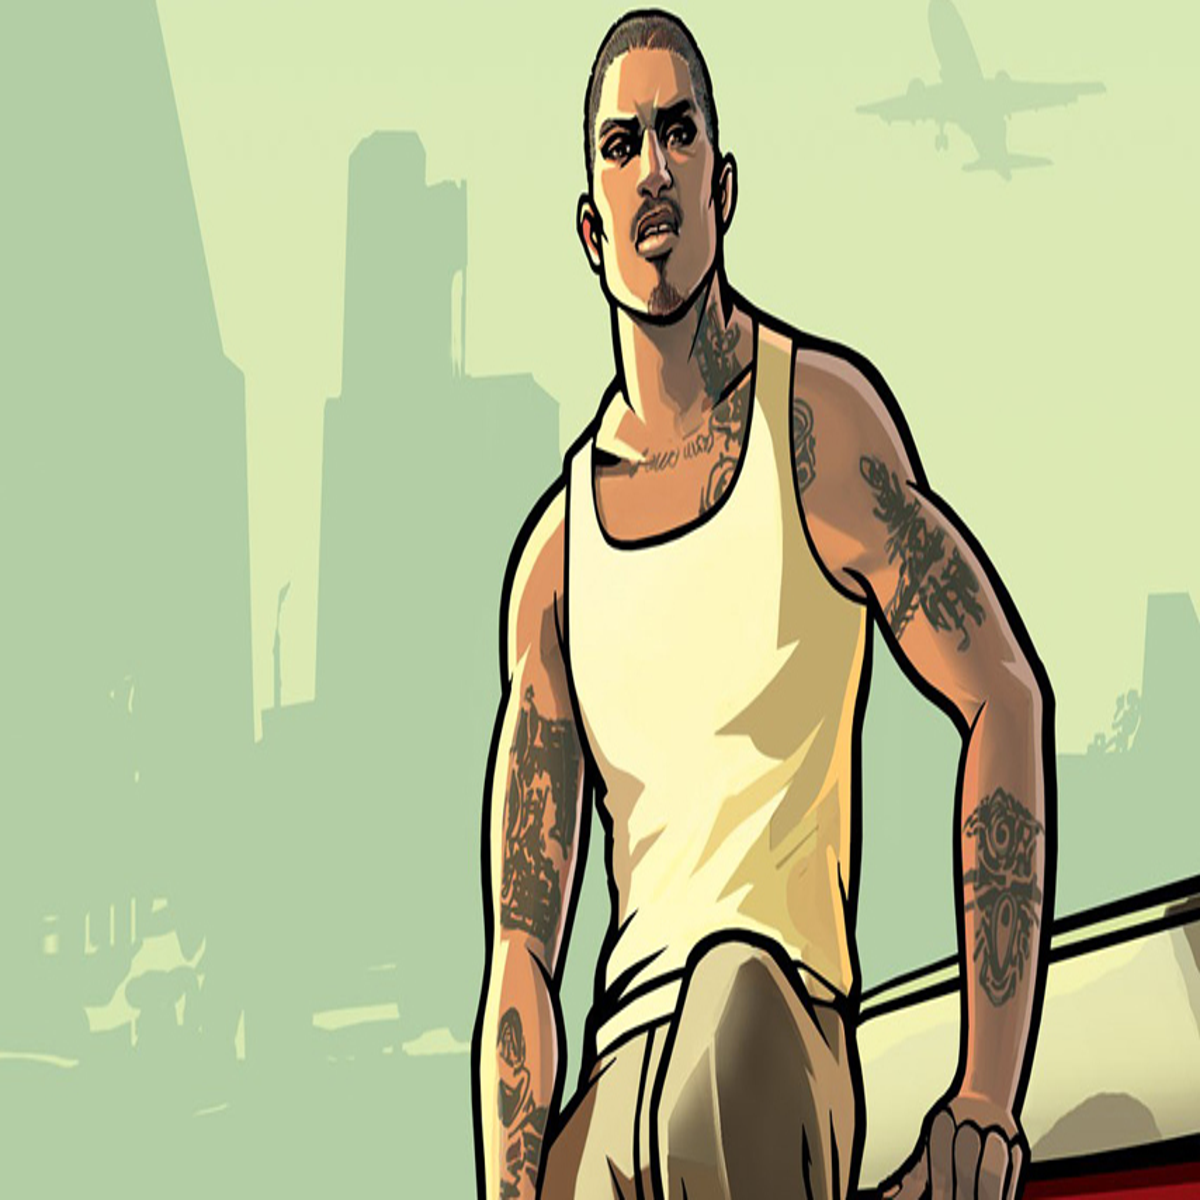 GTA: San Andreas multiplayer mods continue to thrive in the age of GTA  Online – but why?